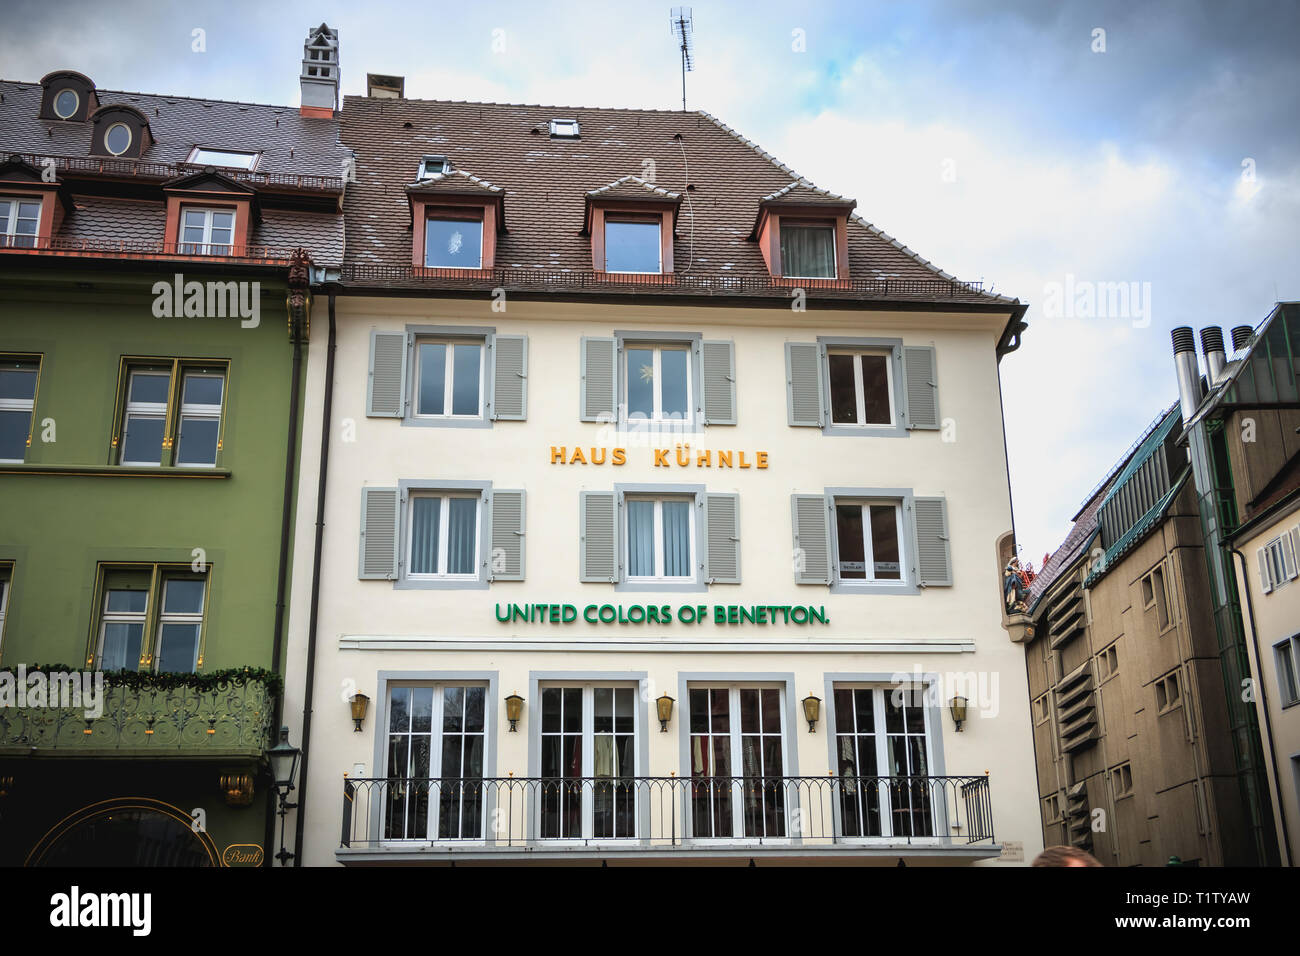 Freiburg im Breisgau, Germany - December 31, 2017: facade of the Haus  Kuhnle store - United Colors of Benetton - in the historic city center on a  wint Stock Photo - Alamy